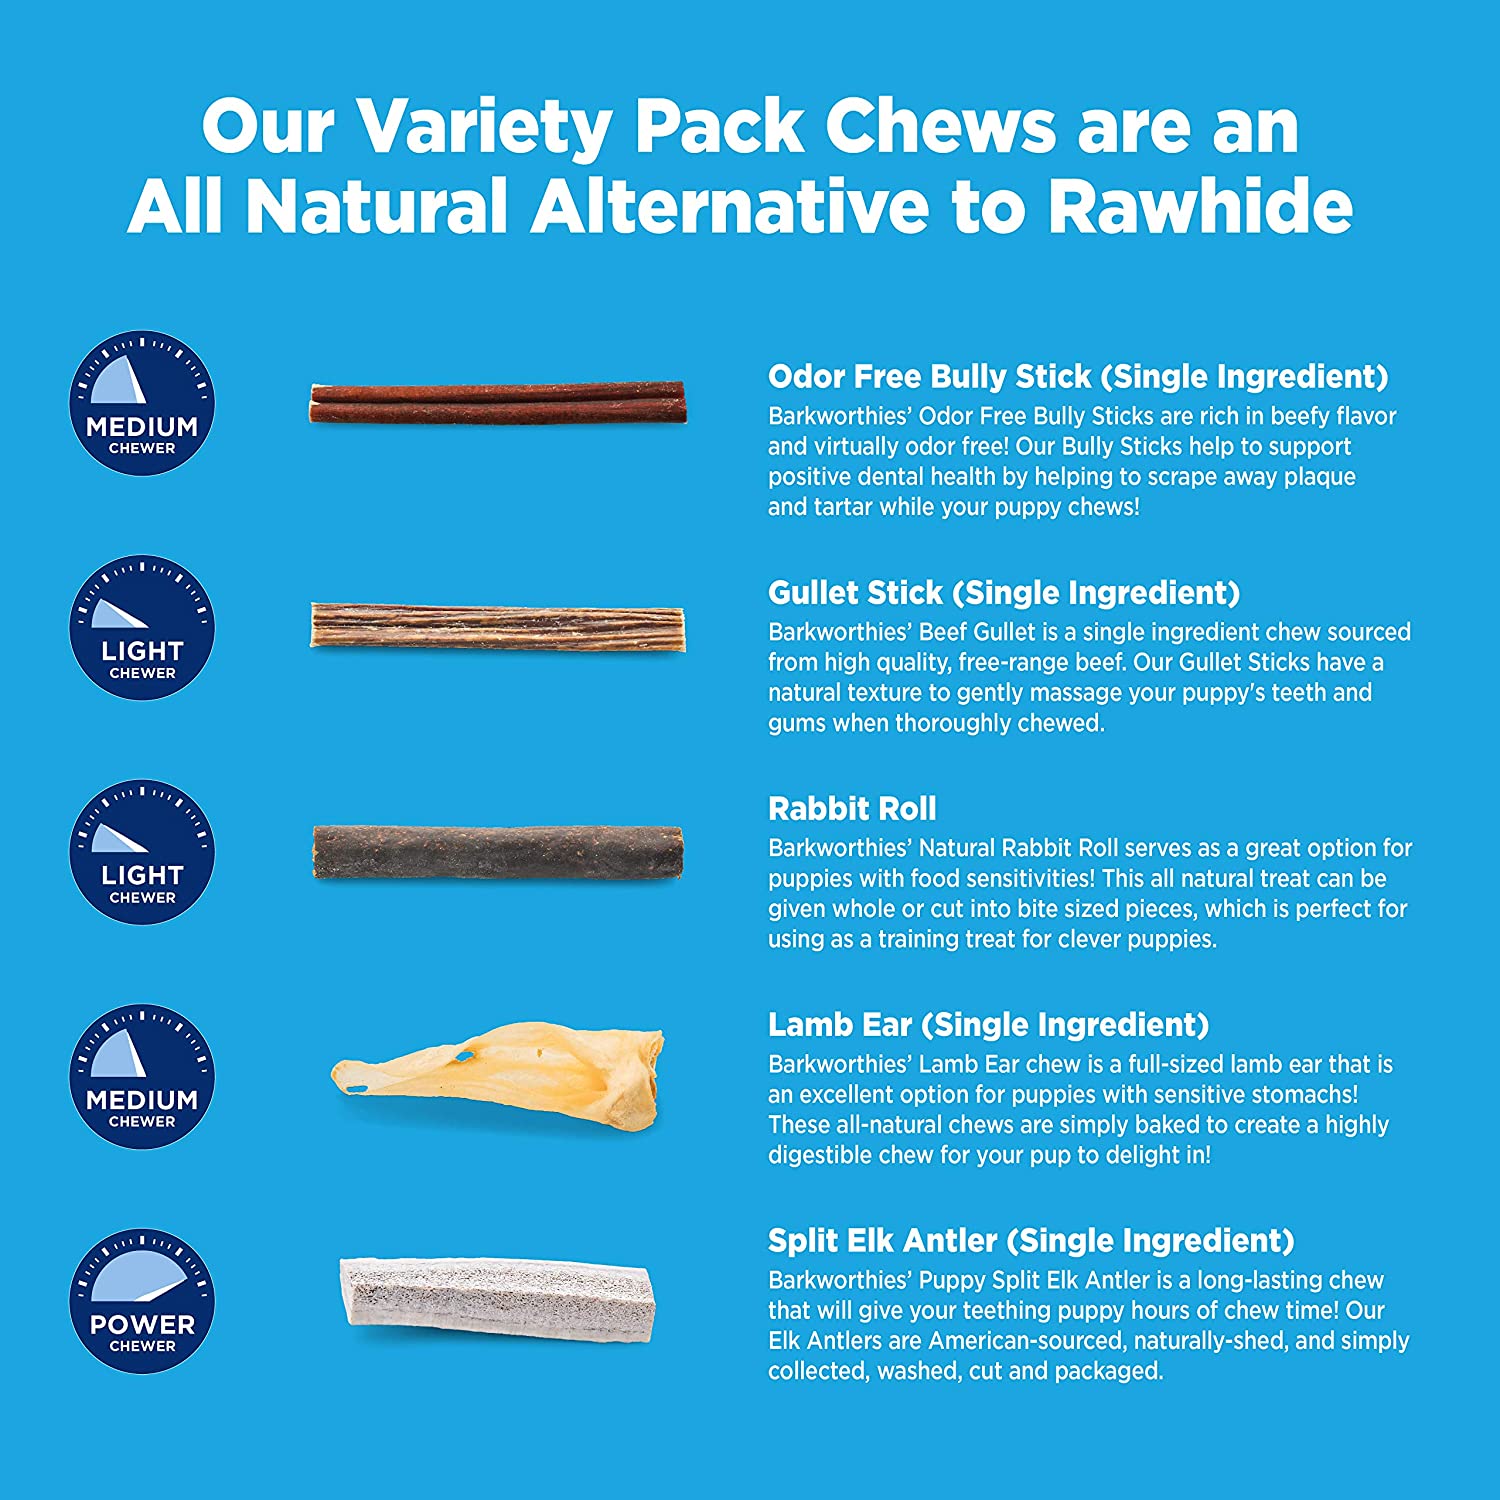 Barkworthies Healthy Dog Treats & Chews Variety Pack - Protein-Rich, All-Natural, Highly Digestible, Rawhide Alternative - Promotes Dental Health - Great Gift for All Dogs